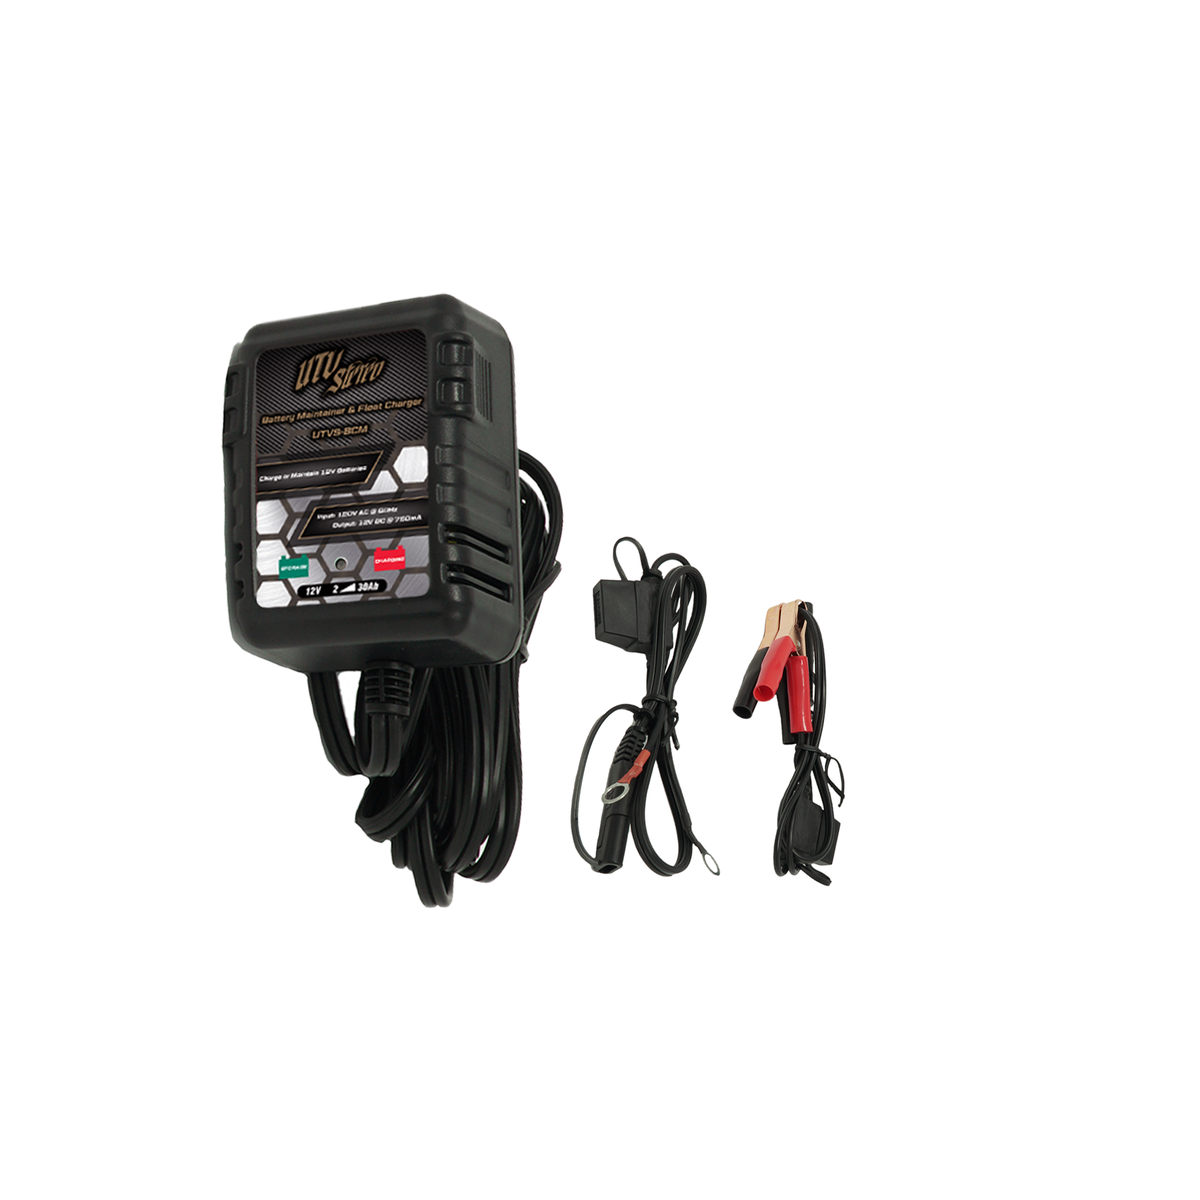 12 Volt Automatic Battery Charger / Maintainer | UTV Stereo